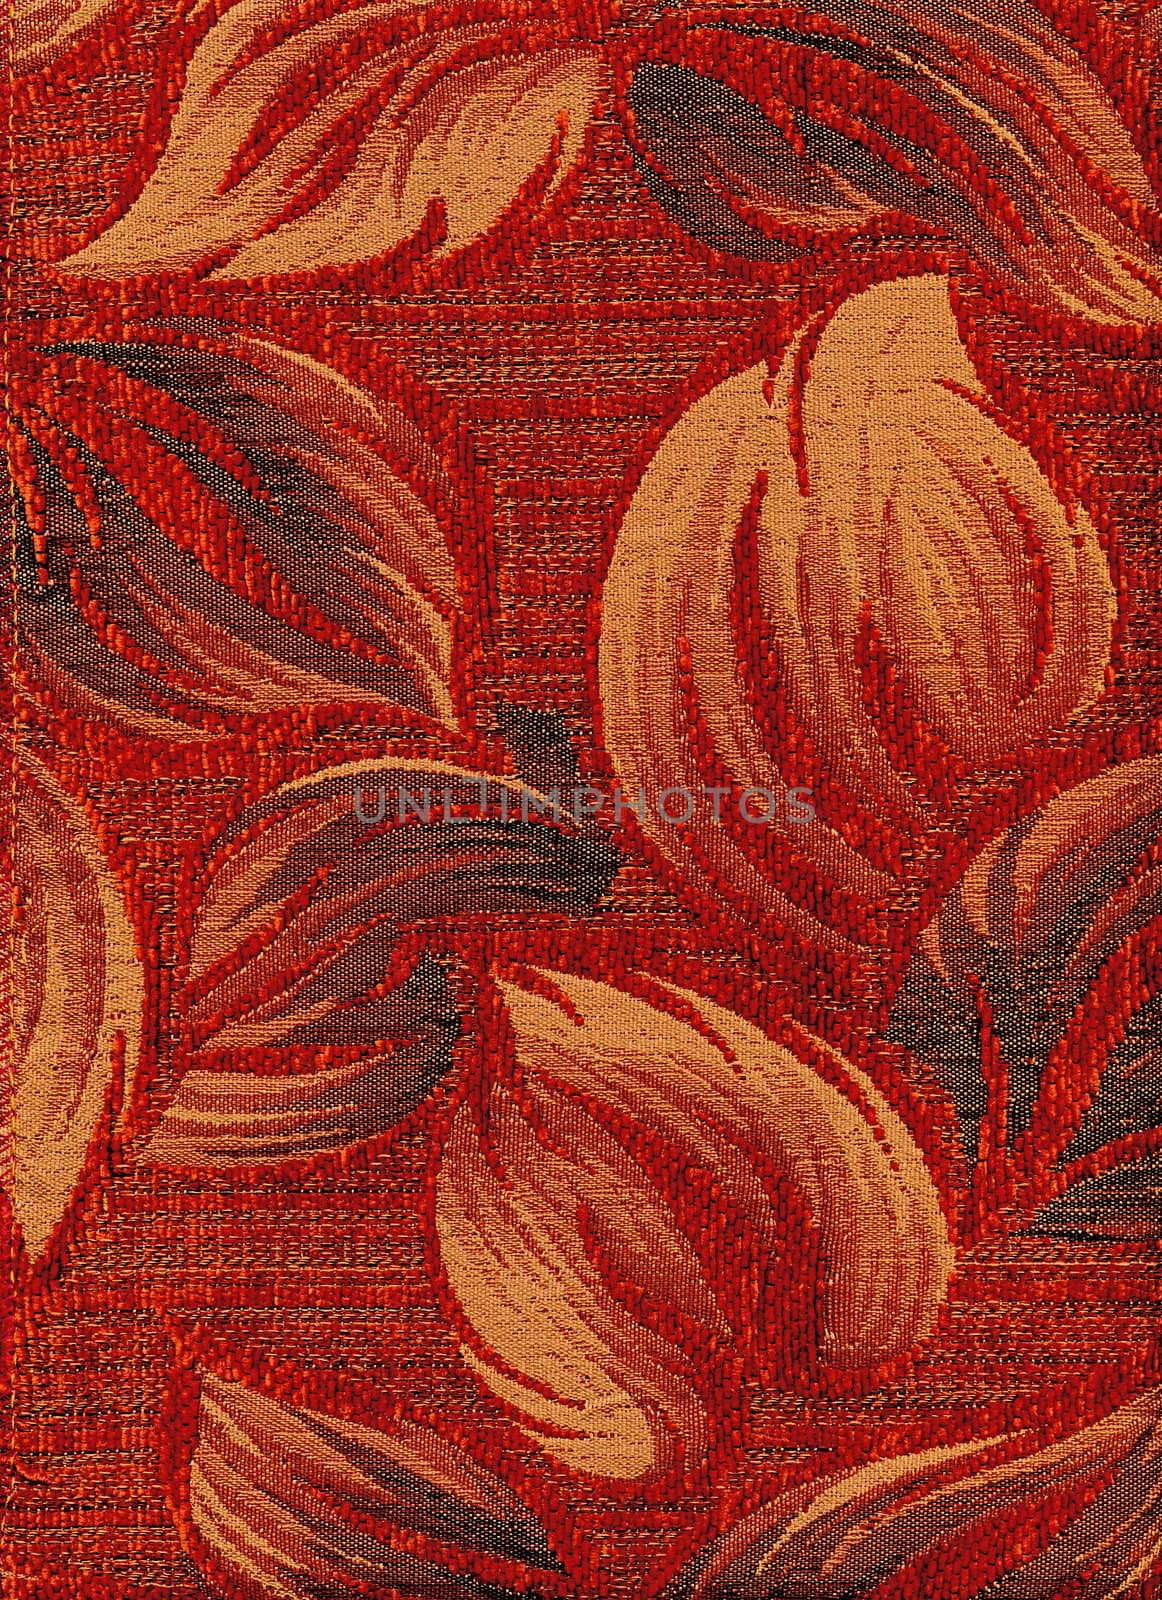 Abstract red background - very detailed and real...